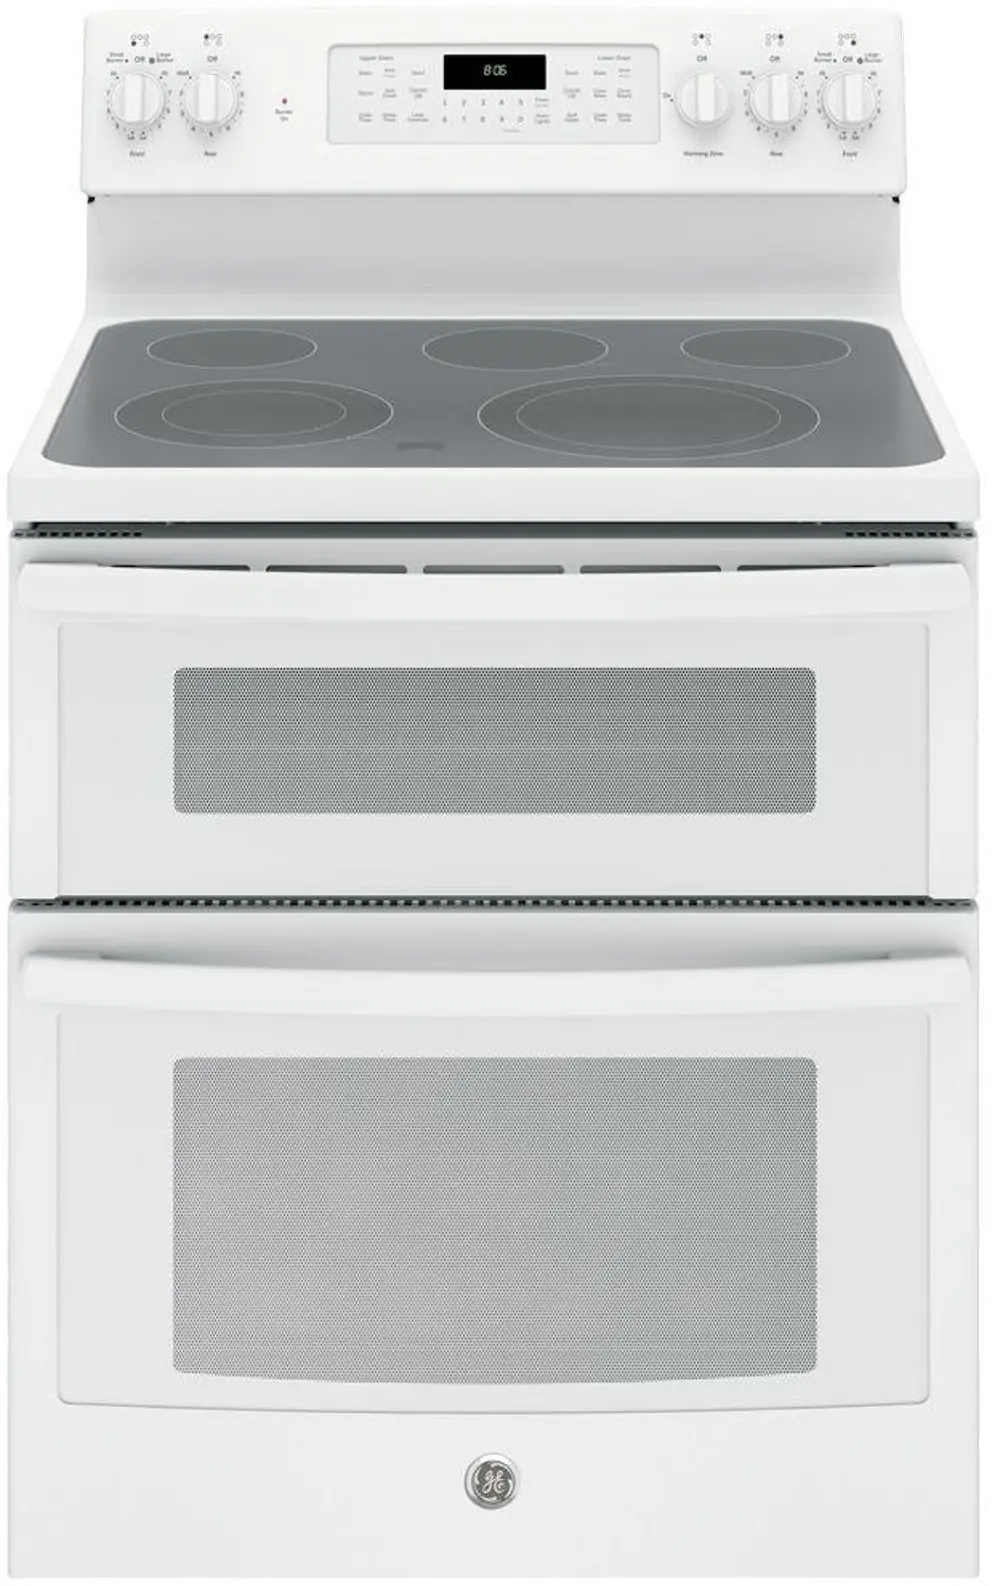 JB860DJWW GE Double Oven Electric Range - 6.6 cu. ft. White-1